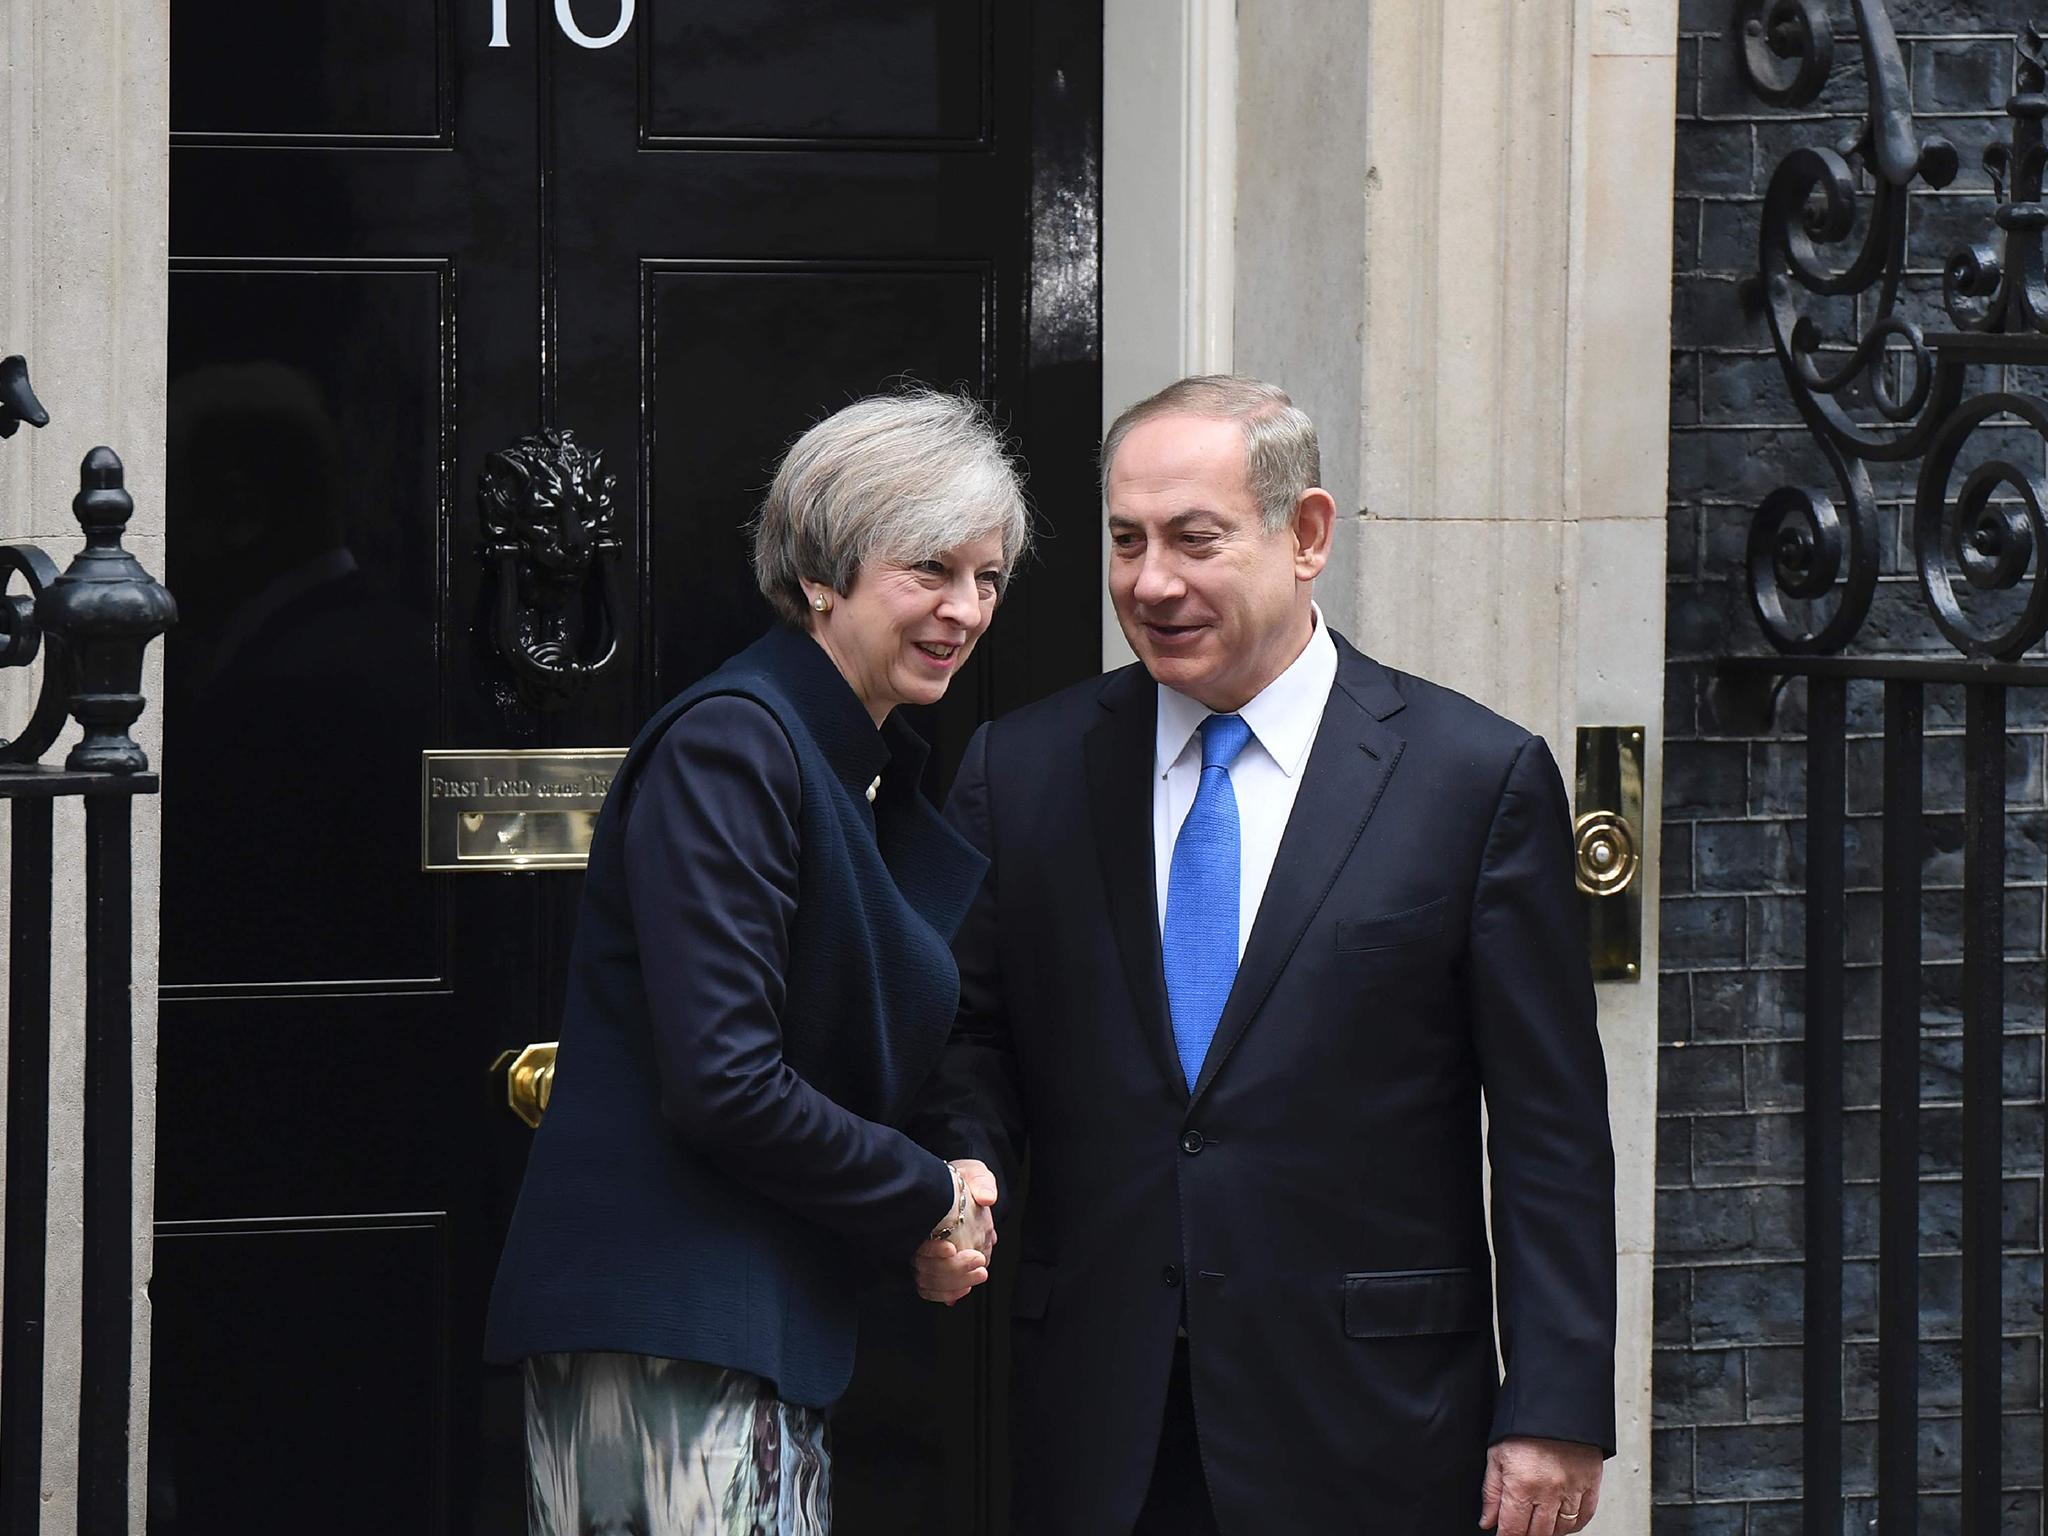 Theresa May shaking hands with Israeli Prime Minister Benjamin Netanyahu after Netanyahu arrived for a meeting at 10 Downing Street in central London